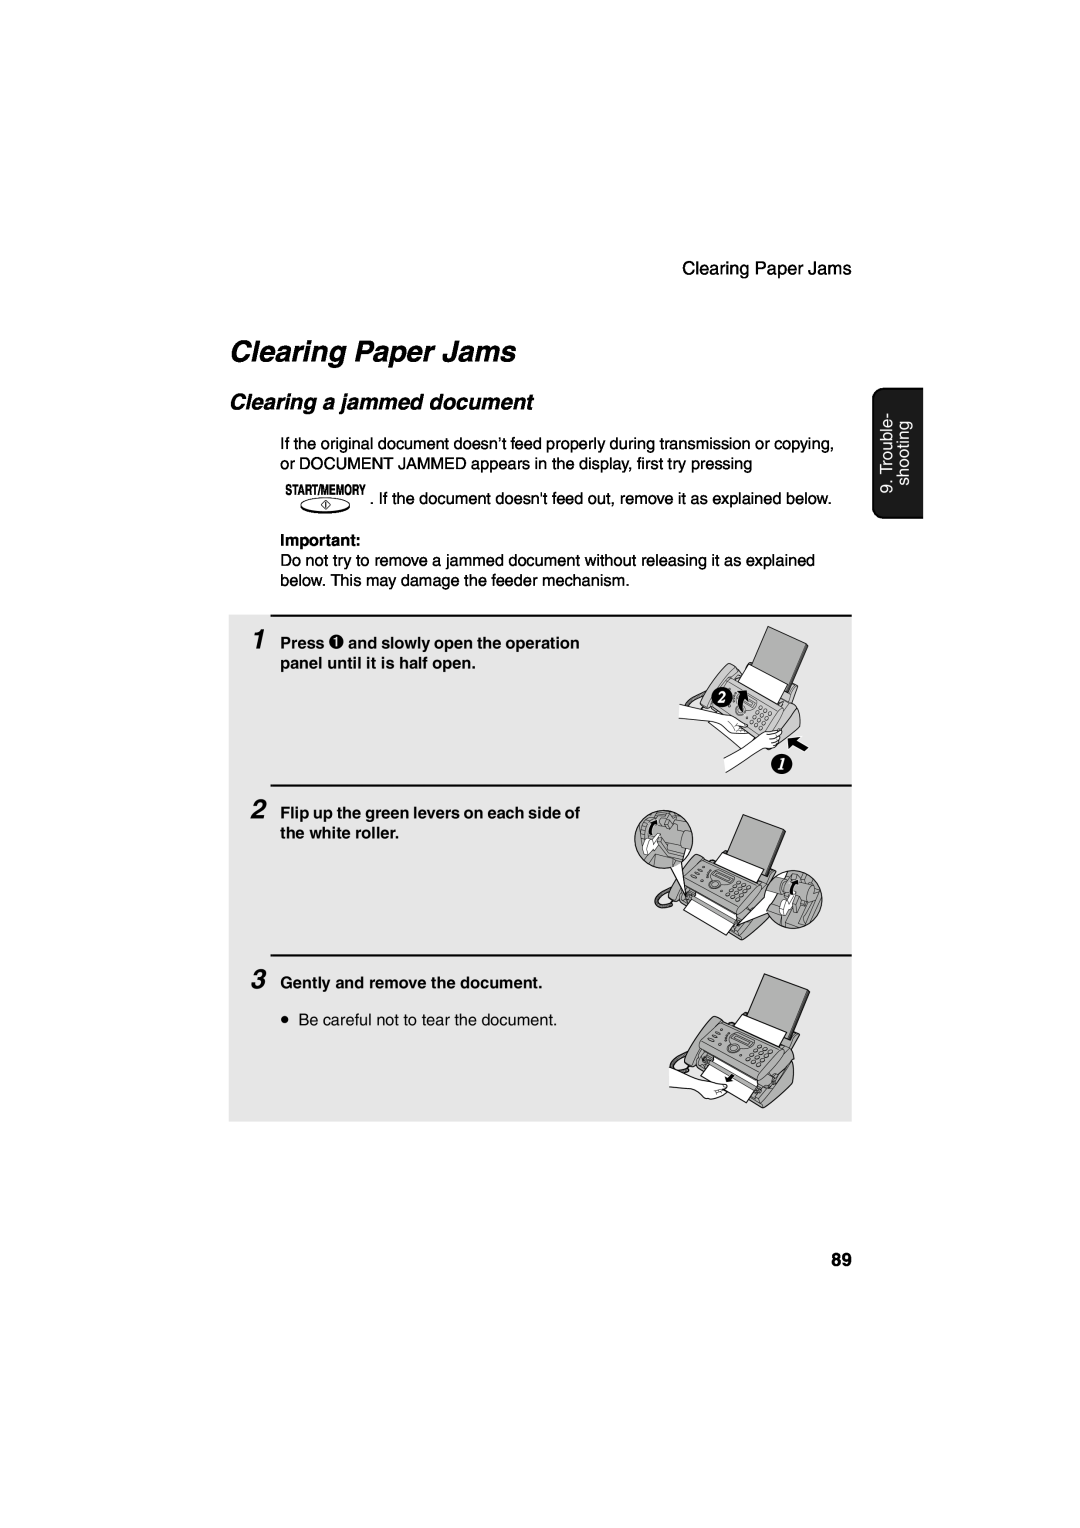 Sharp UX-A260 manual Clearing Paper Jams, Clearing a jammed document, Trouble- shooting 